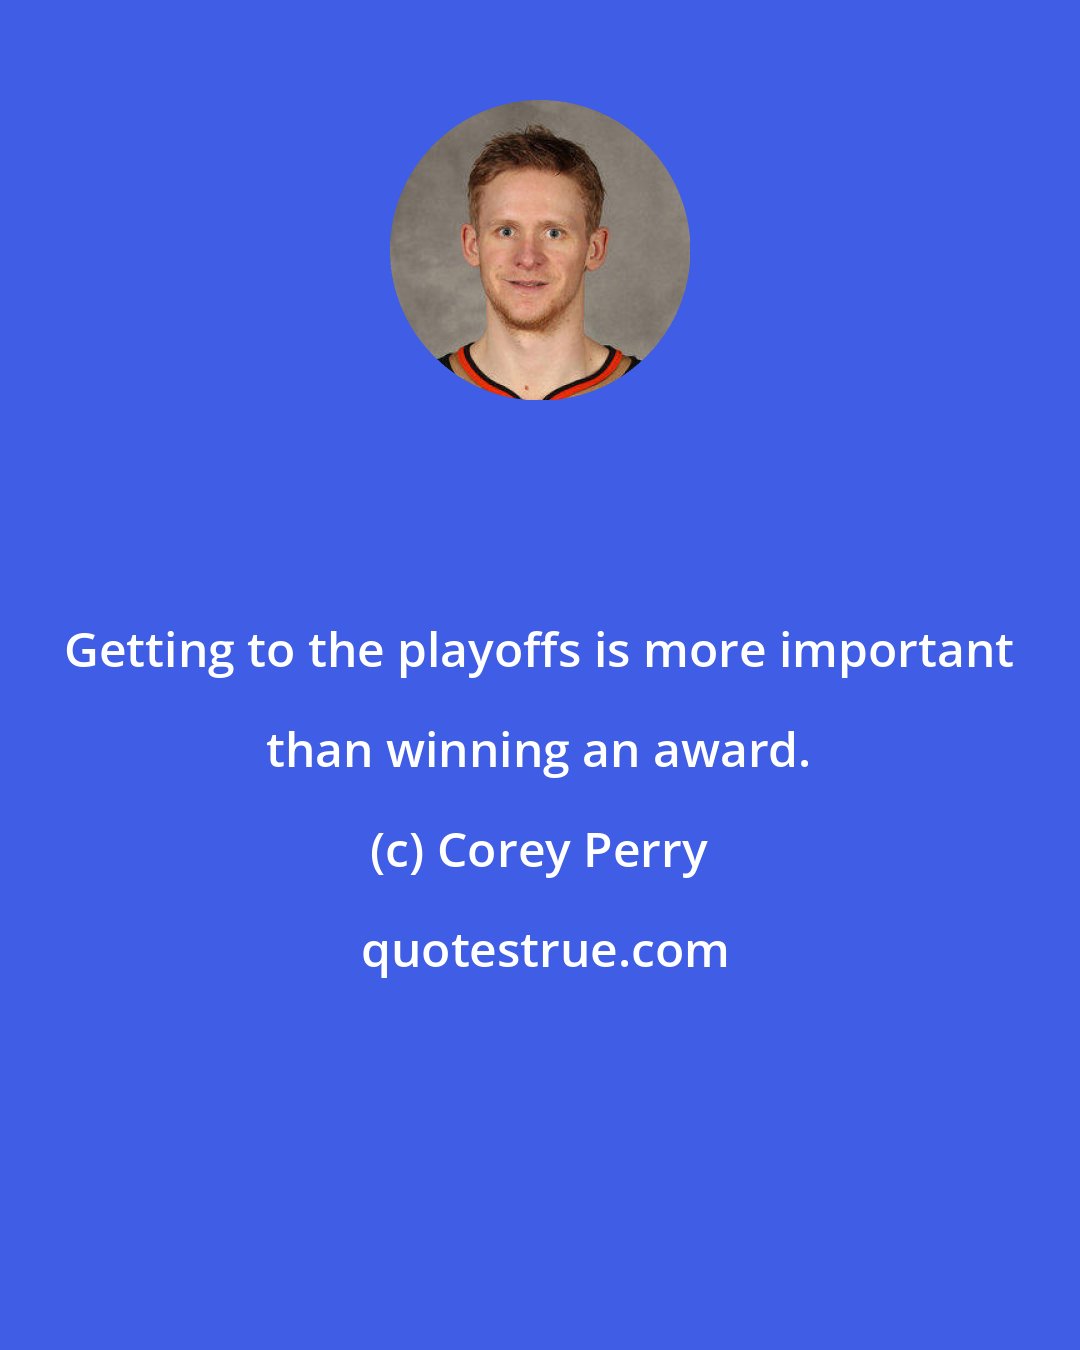 Corey Perry: Getting to the playoffs is more important than winning an award.